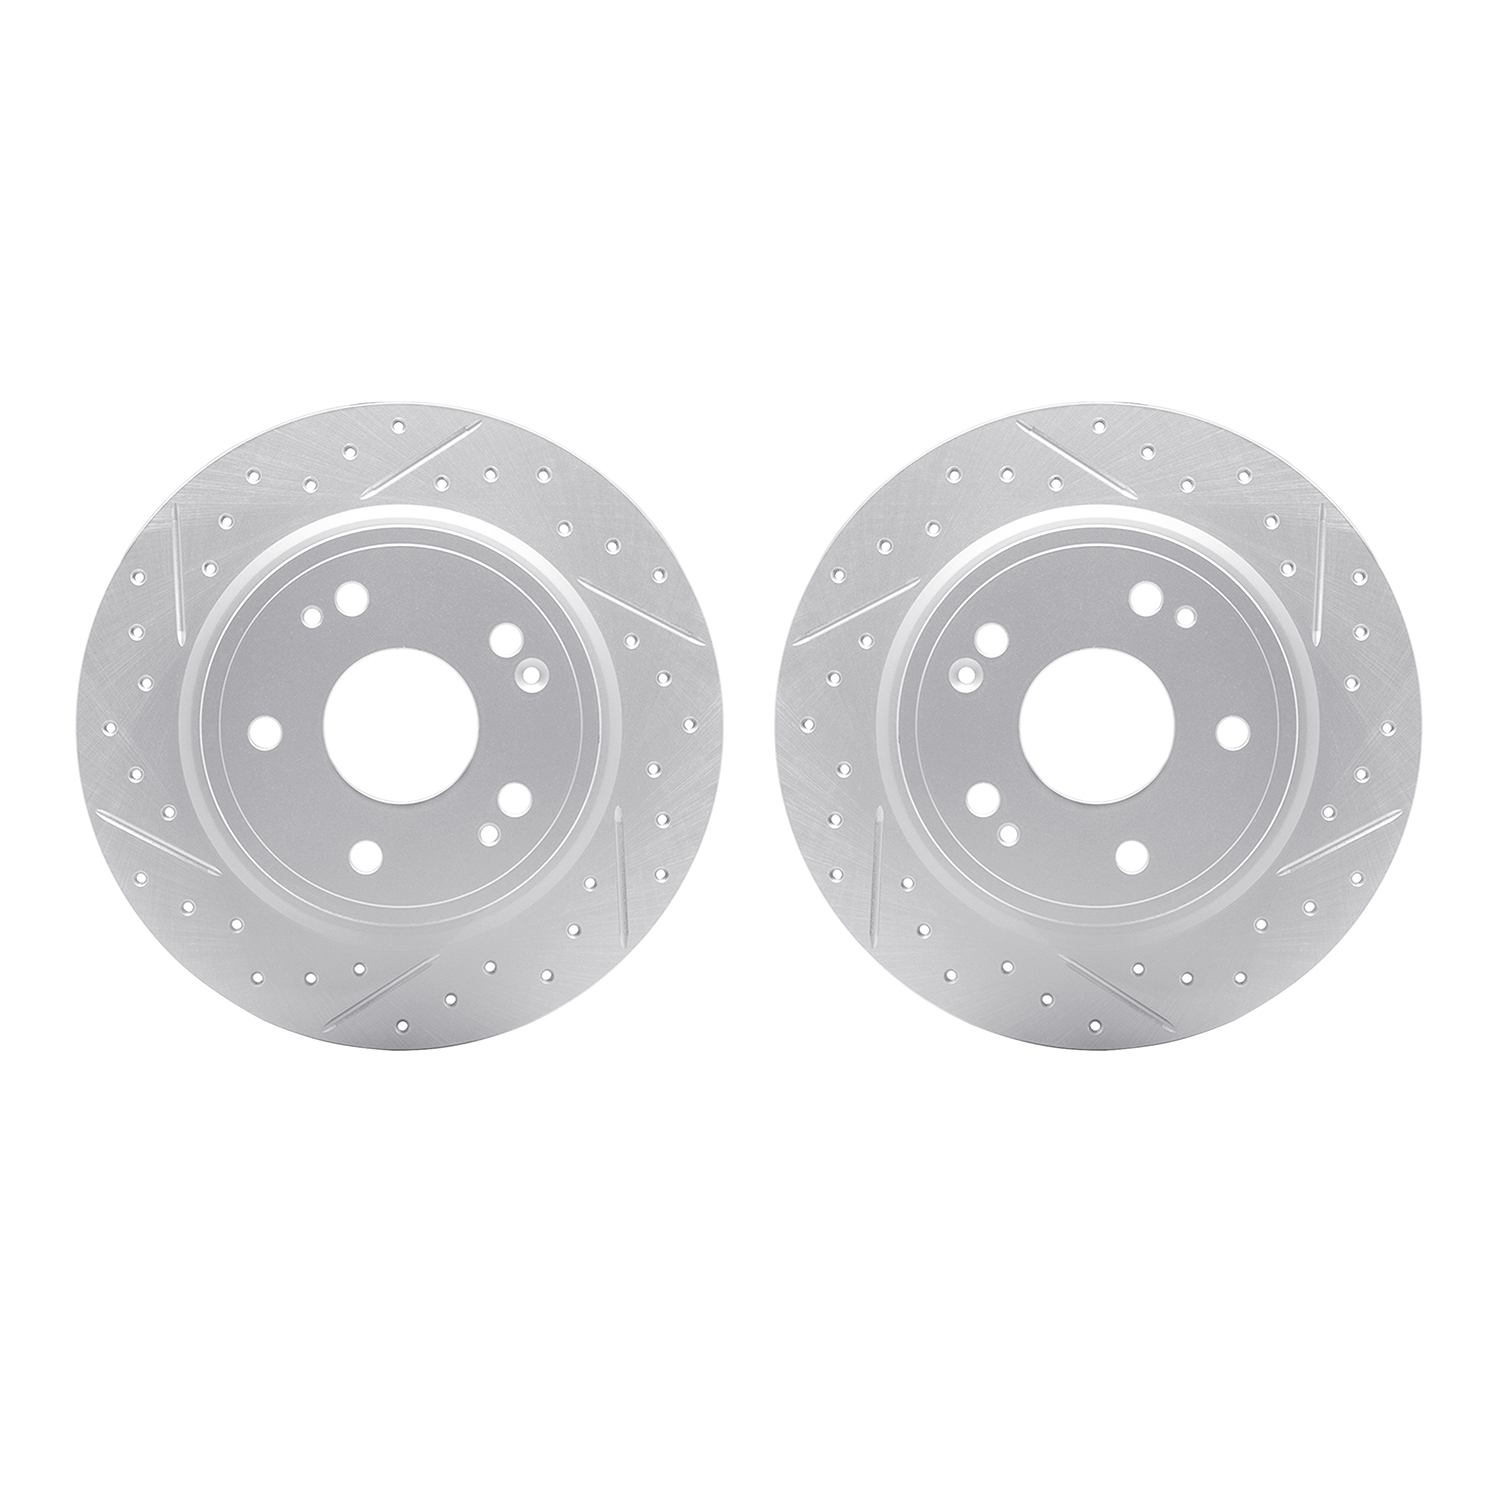 2002-59044 Geoperformance Drilled/Slotted Brake Rotors, Fits Select Acura/Honda, Position: Rear